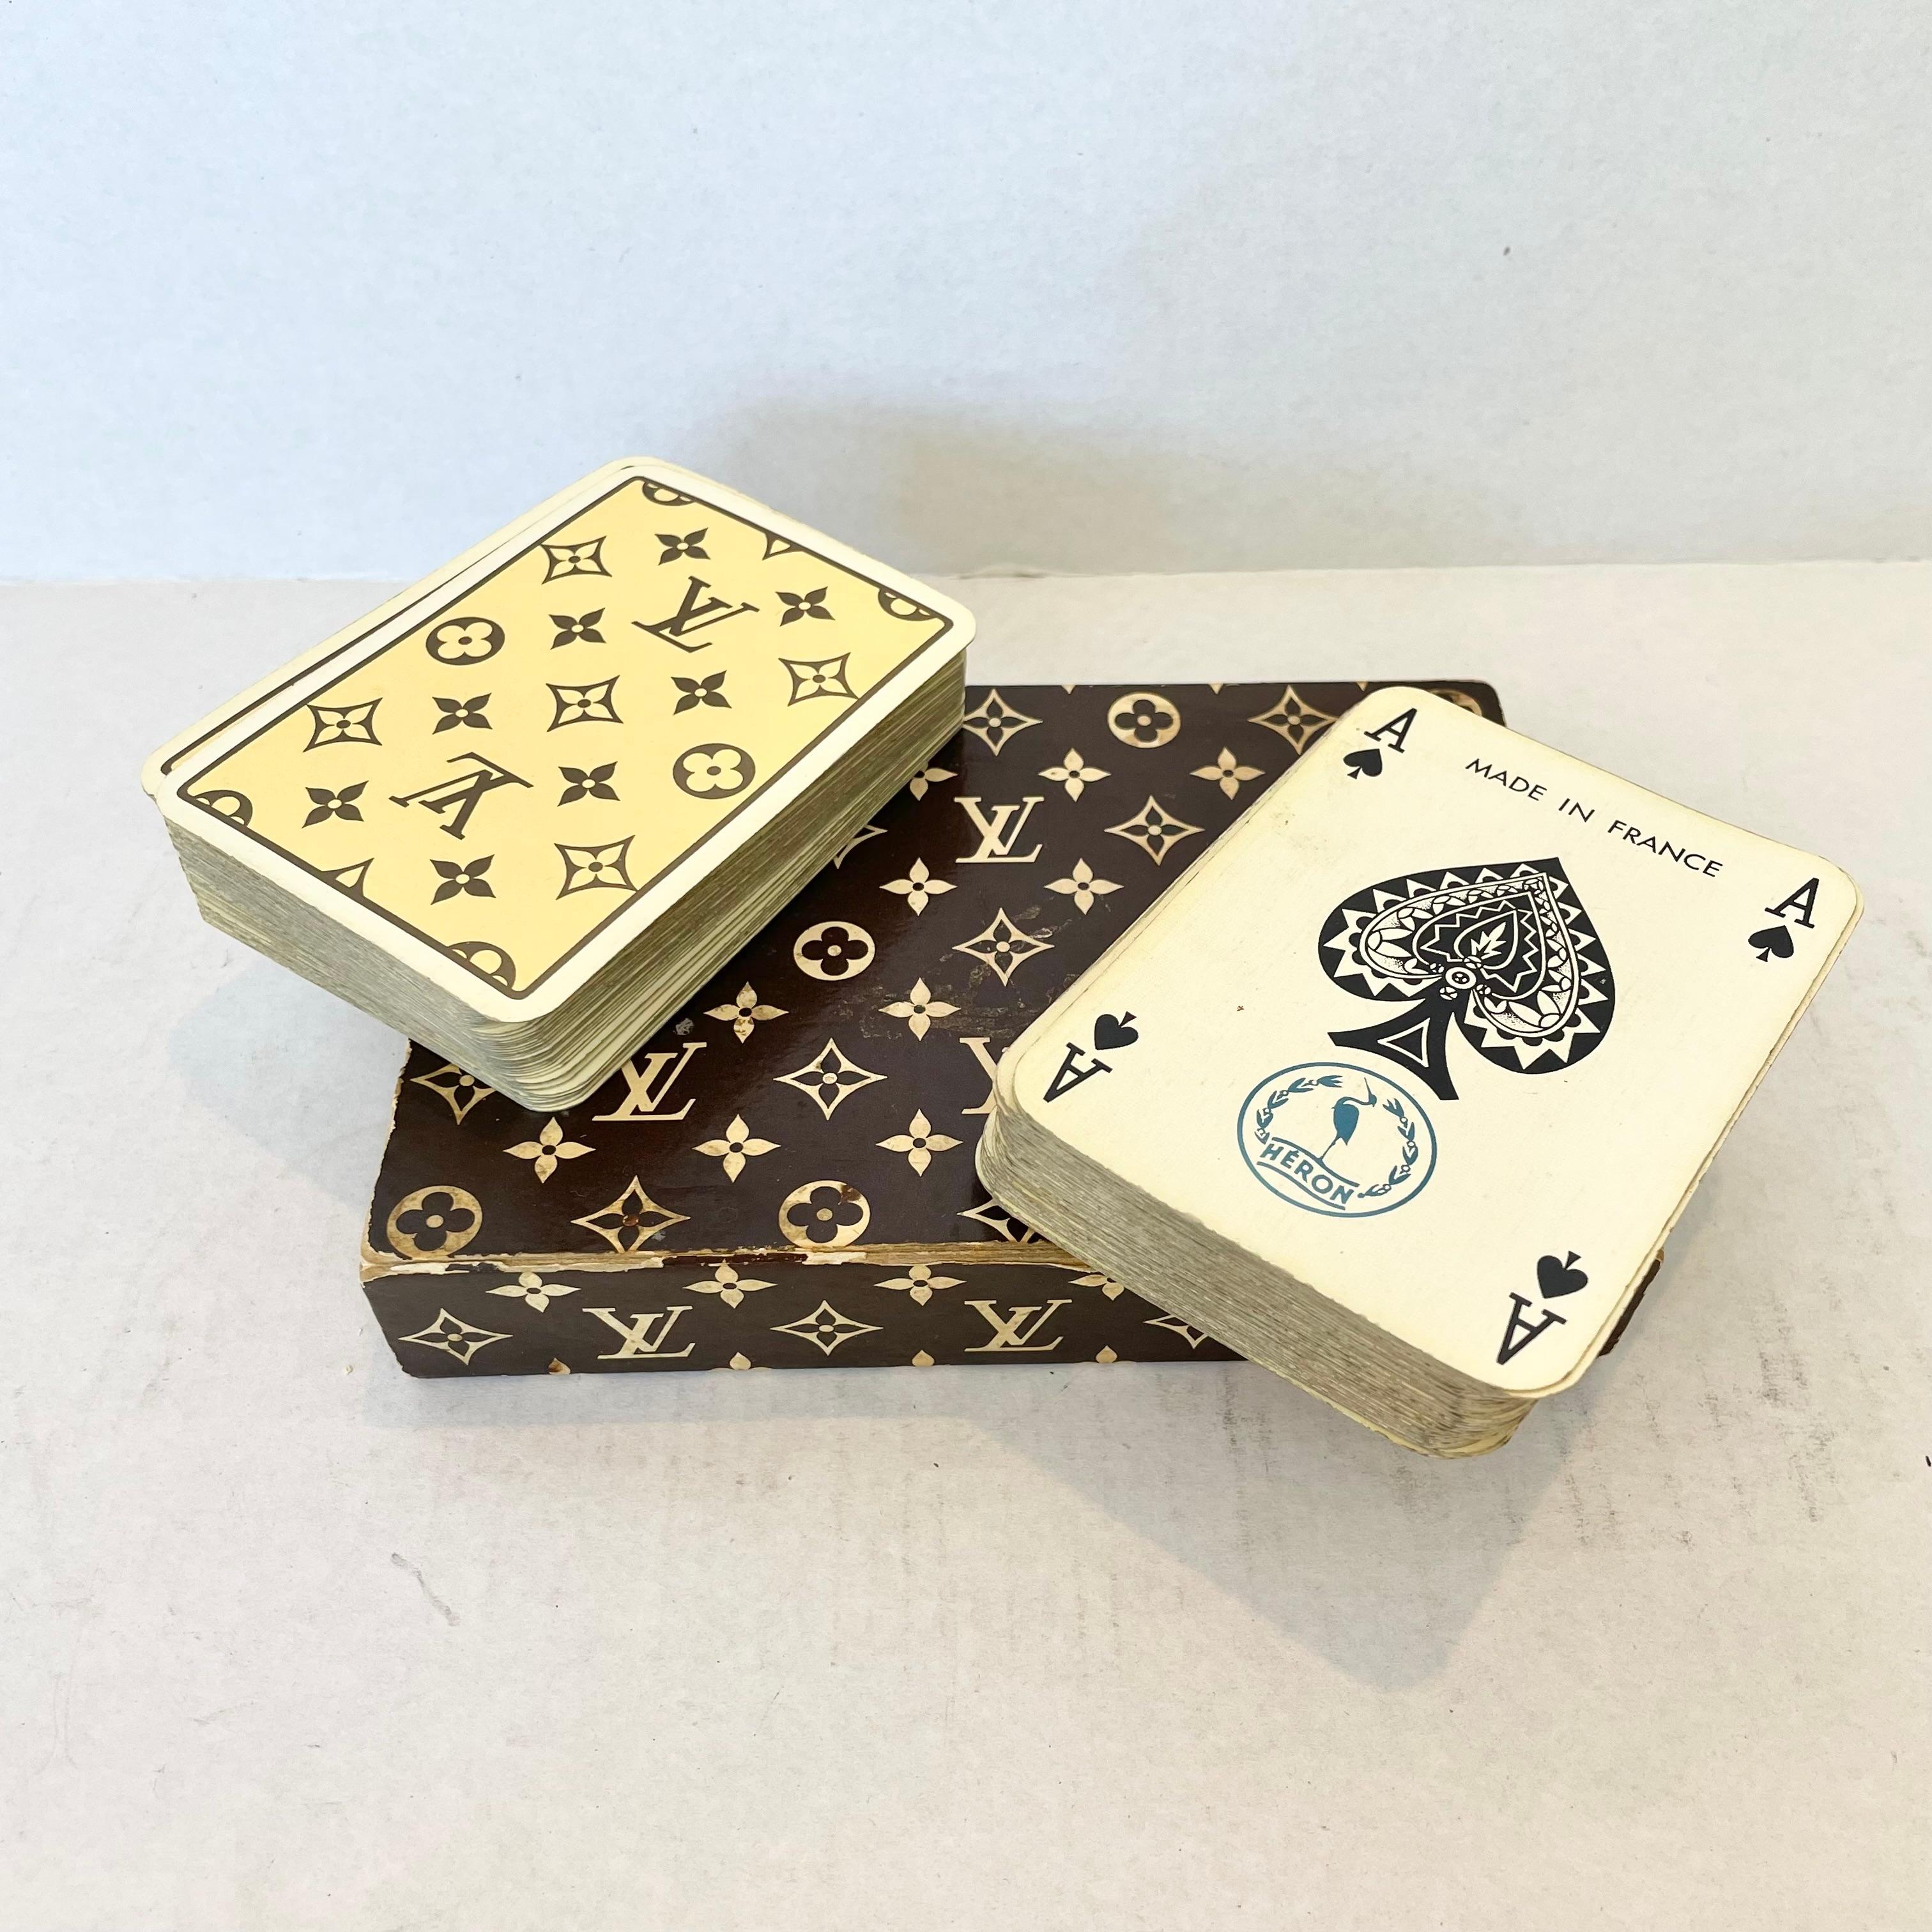 Louis Vuitton Playing Cards 2